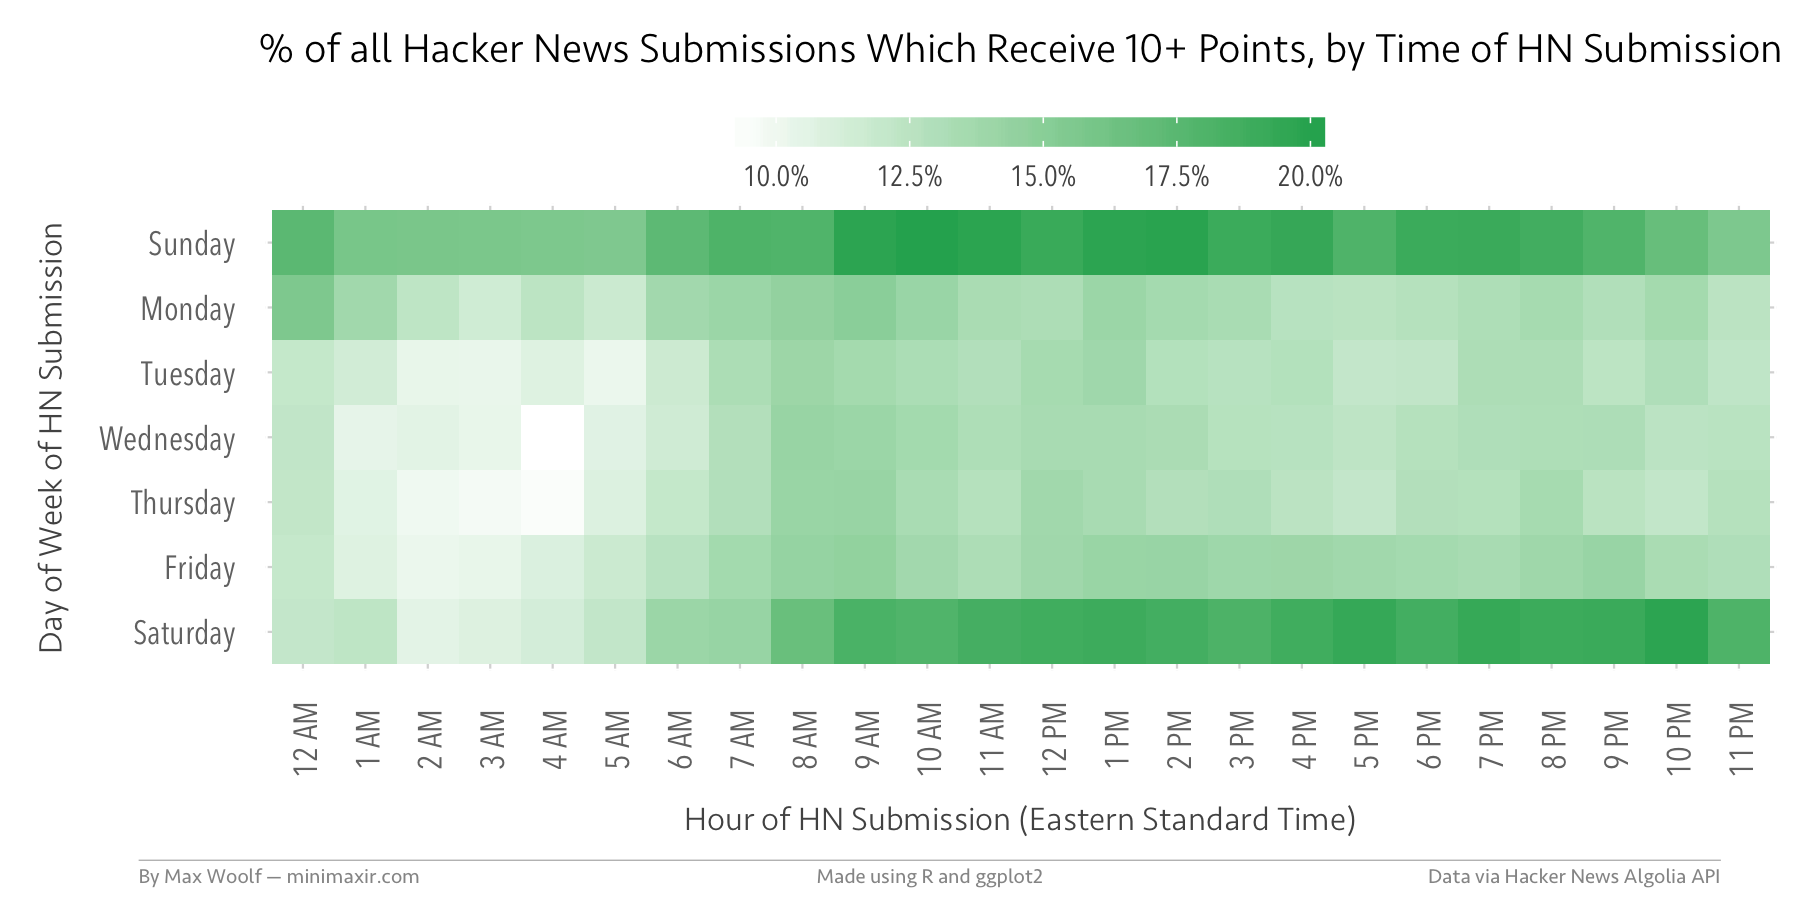 % of all Hacker News Submissions Which Receive 10+ Points